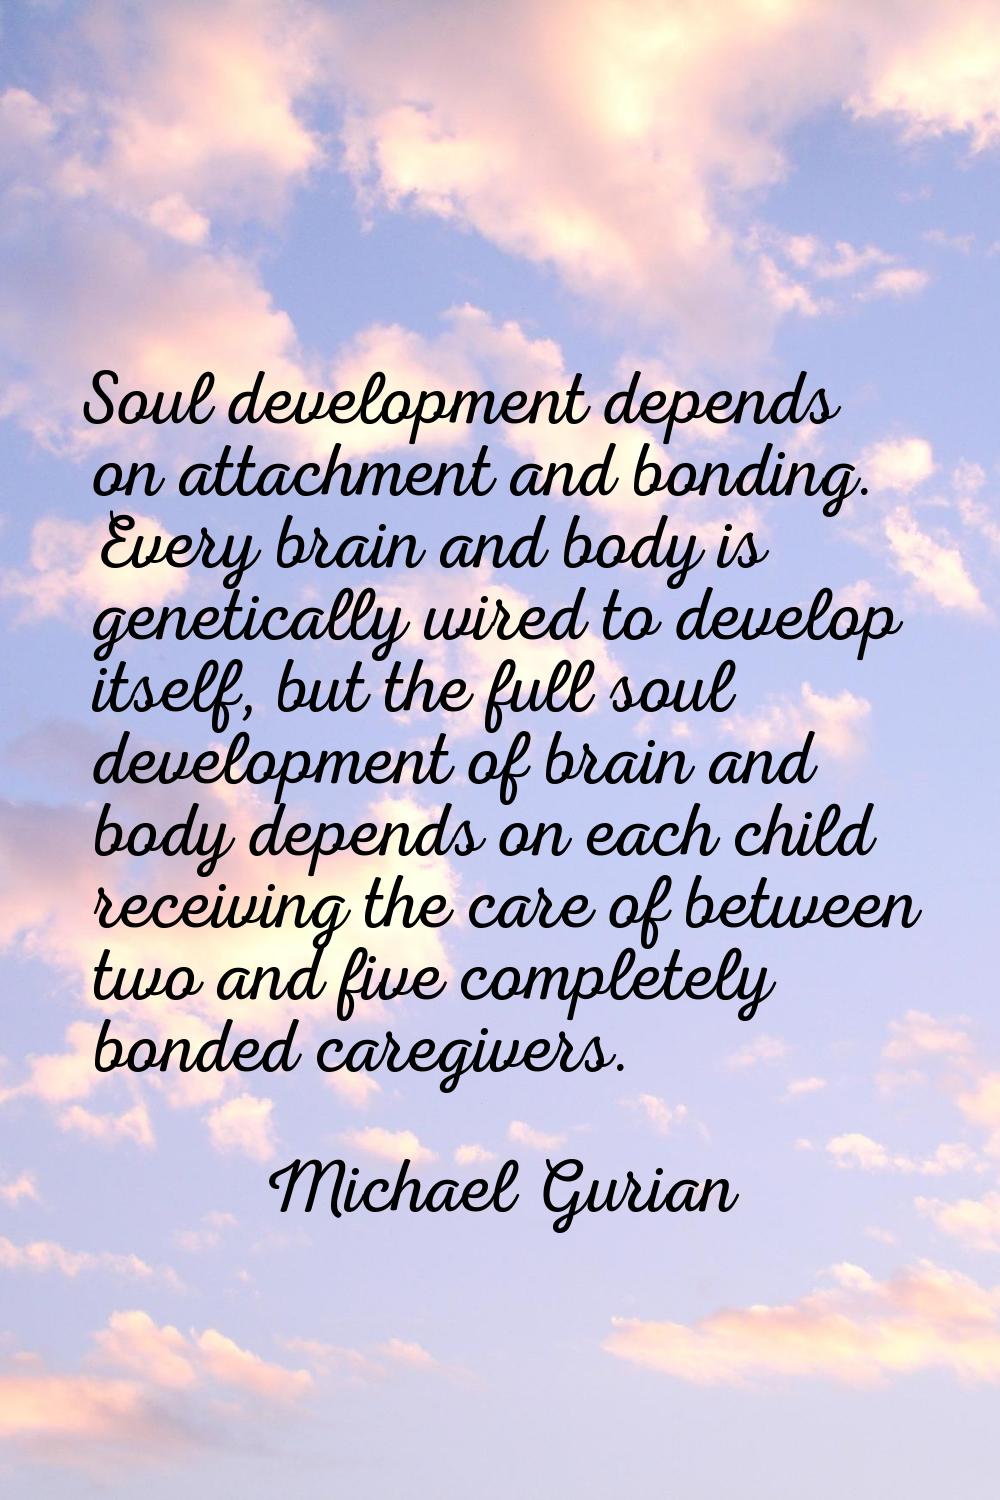 Soul development depends on attachment and bonding. Every brain and body is genetically wired to de